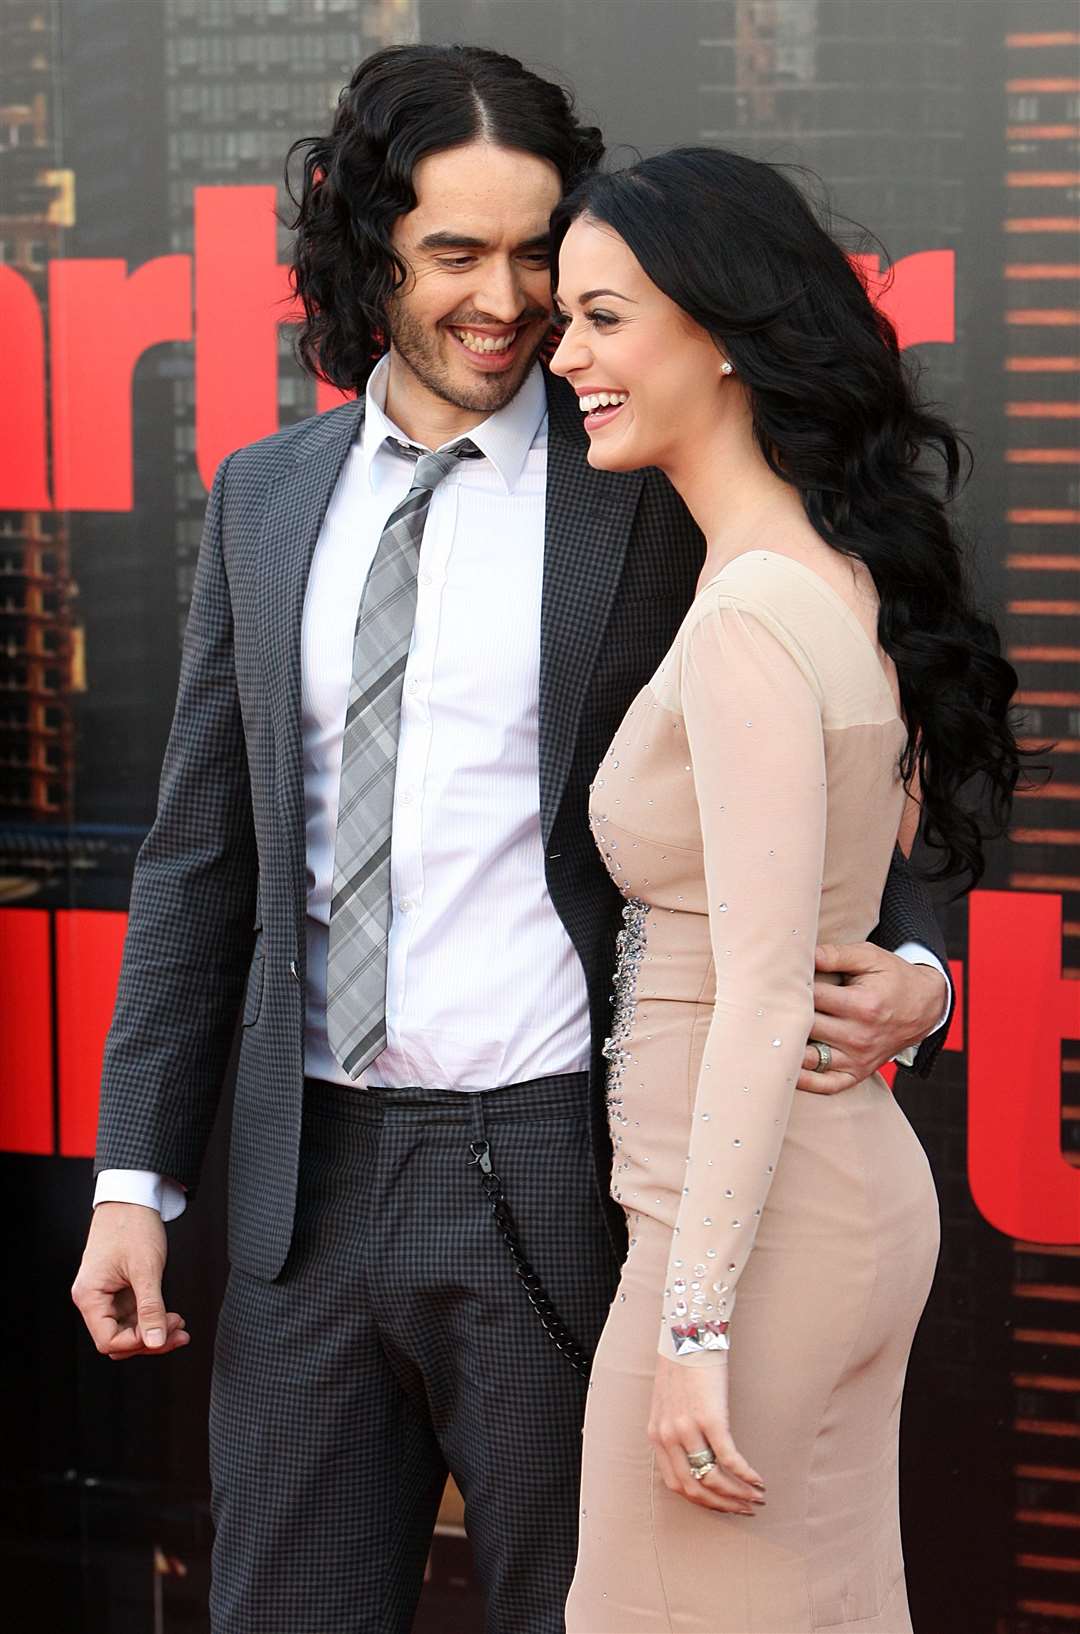 Russell Brand and Katy Perry (Dominic Lipinski/PA)